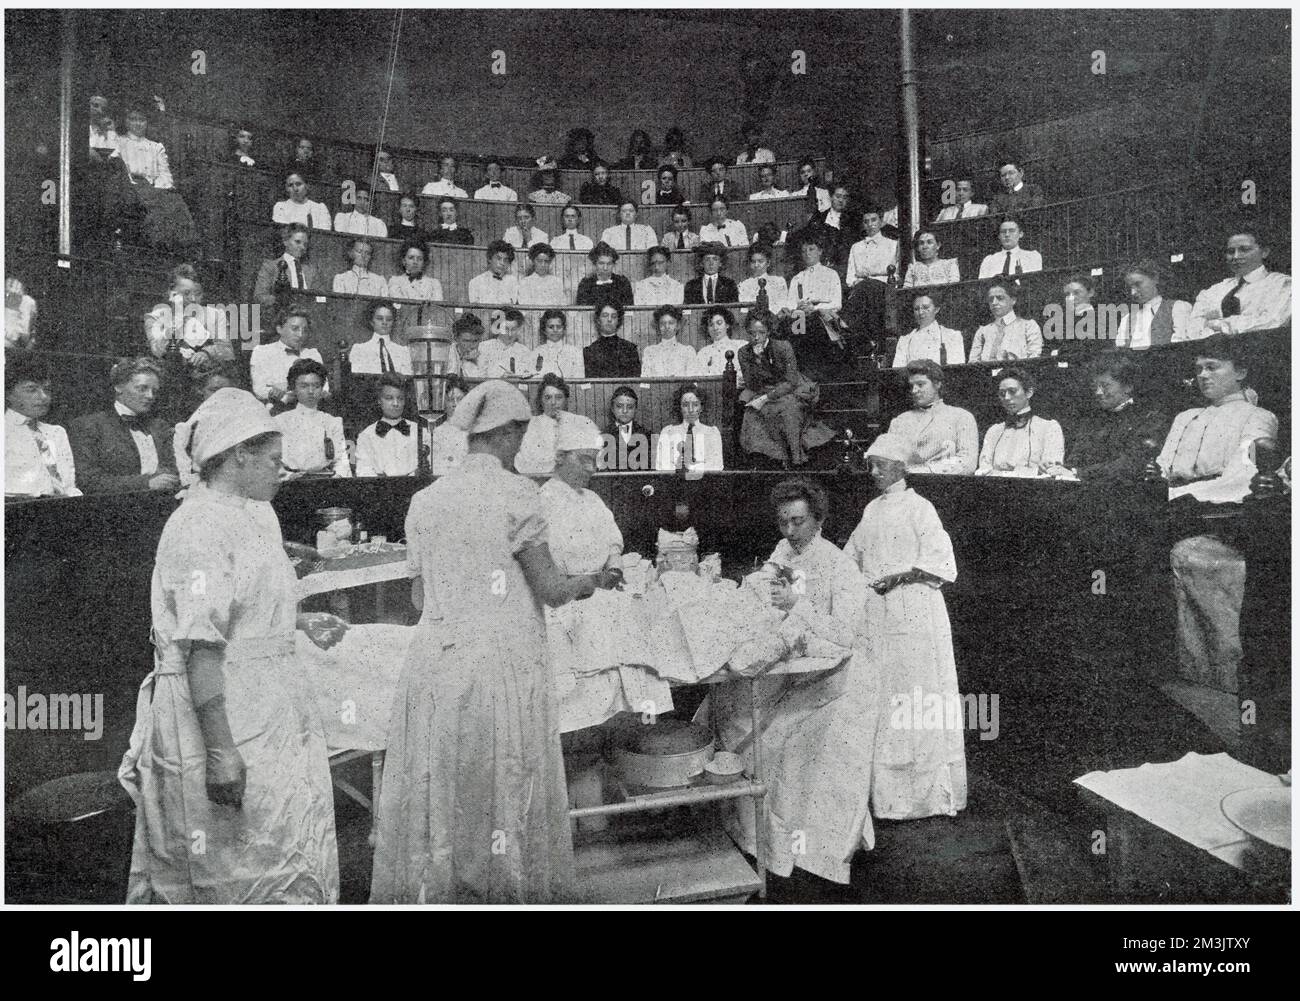 The Women's Medical College of Pennsylvania, a unique college founded by a private enterprise and directed by a committee of female doctors. Students travelled from all over the world, for a strictly women only medical education. Stock Photo